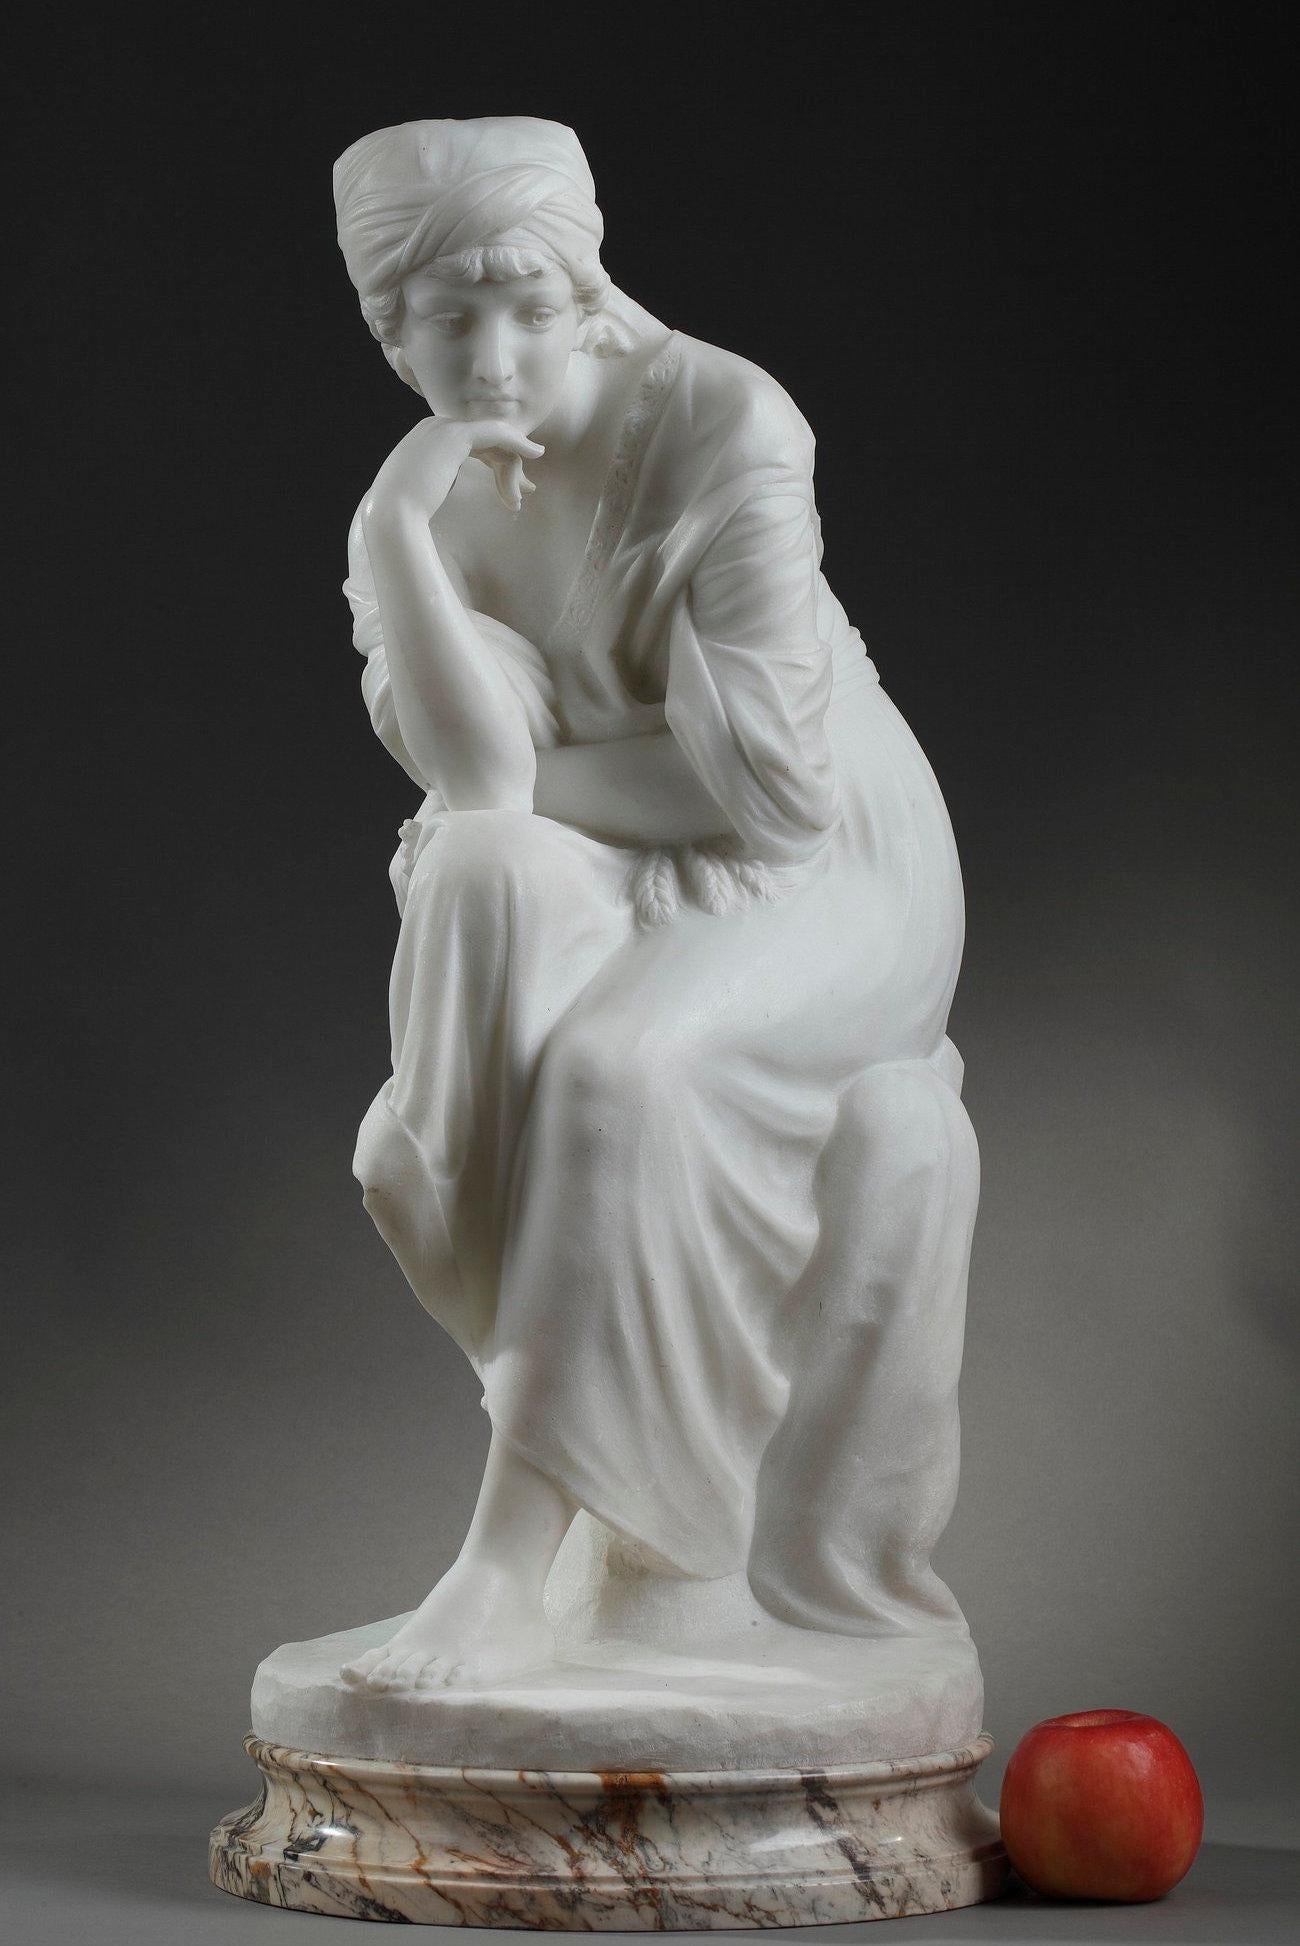 Sculpture of a young woman in white marble called 